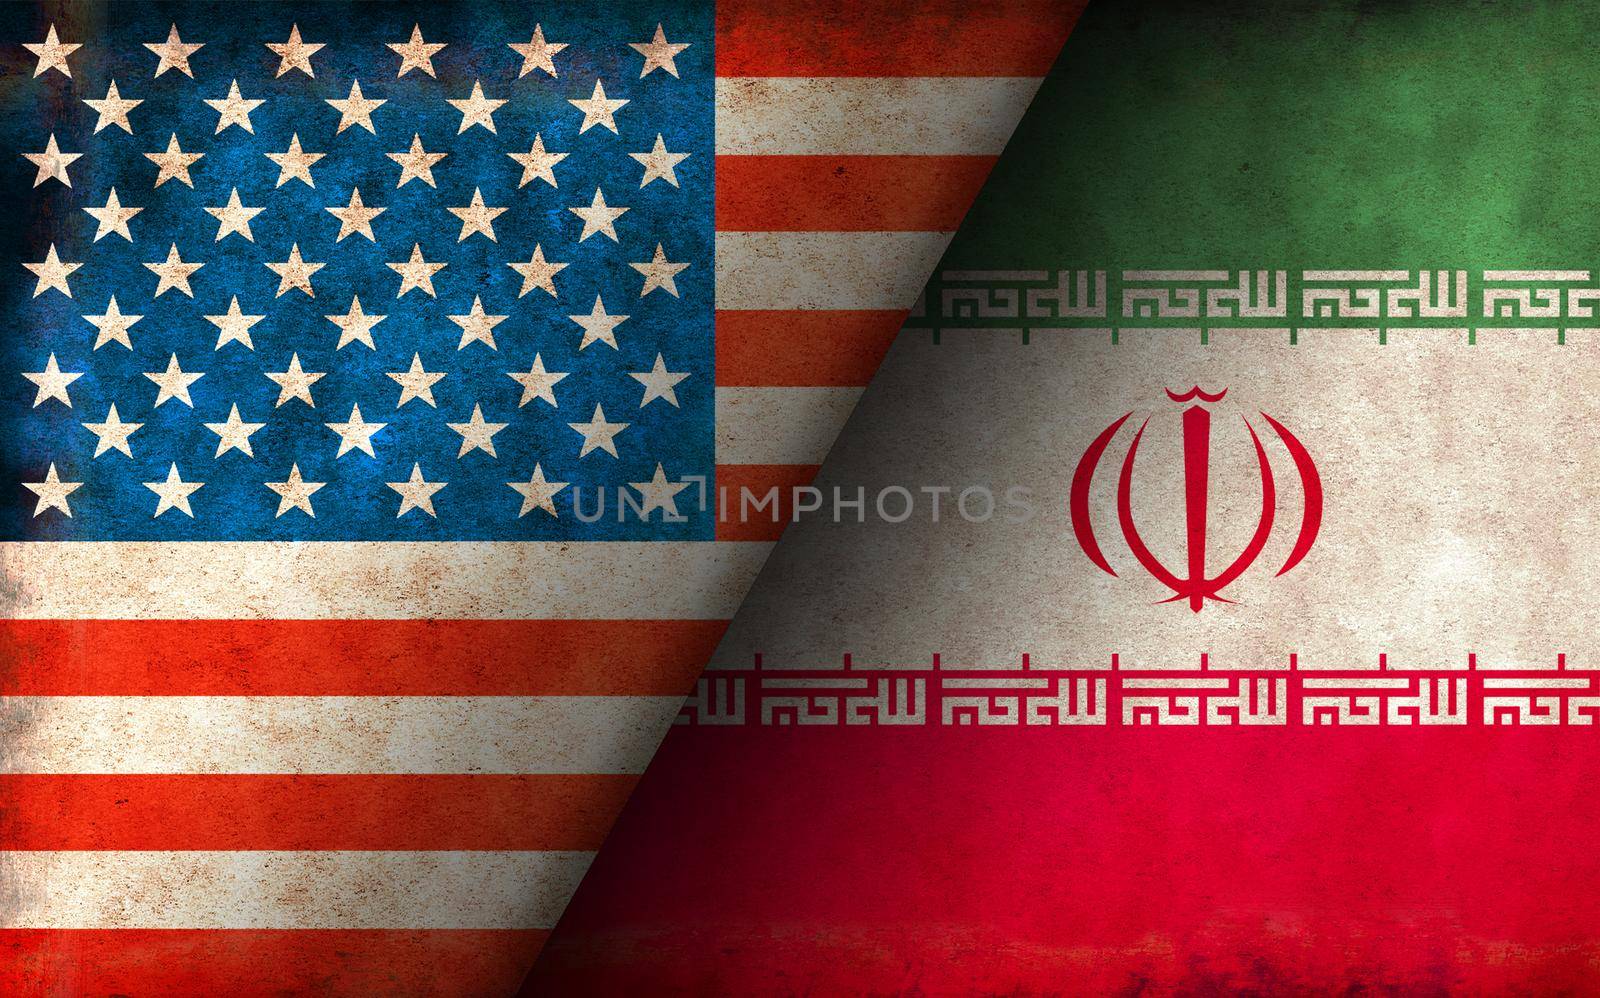 Grunge country flag illustration / USA vs Iran (Political or economic conflict) by barks